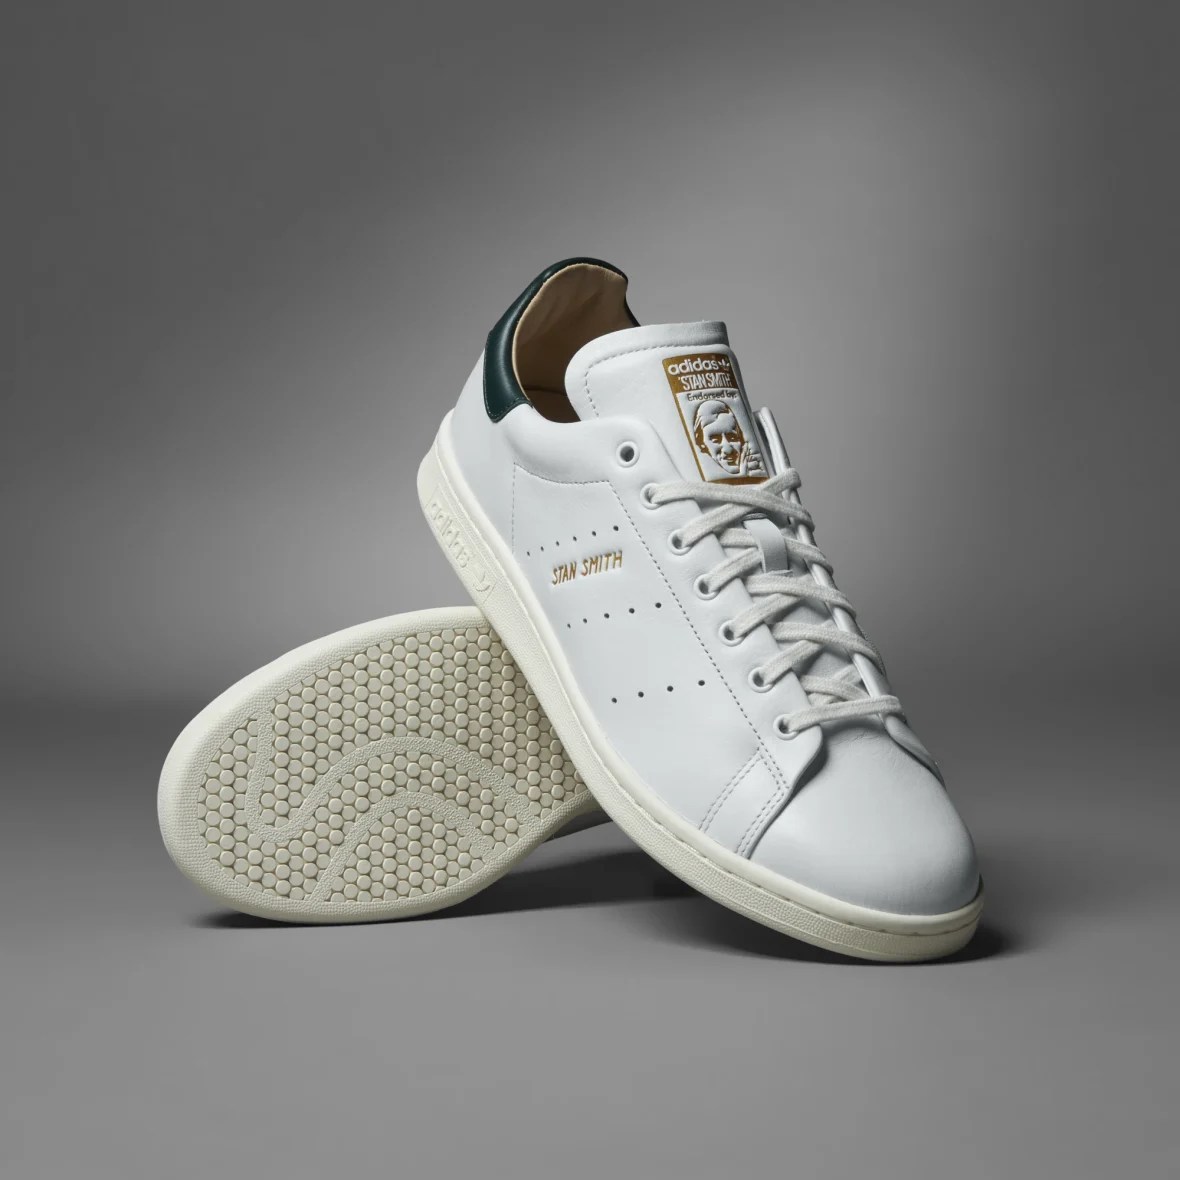 Lidl Stan Smith low top Shoes - LIMITED EDITION